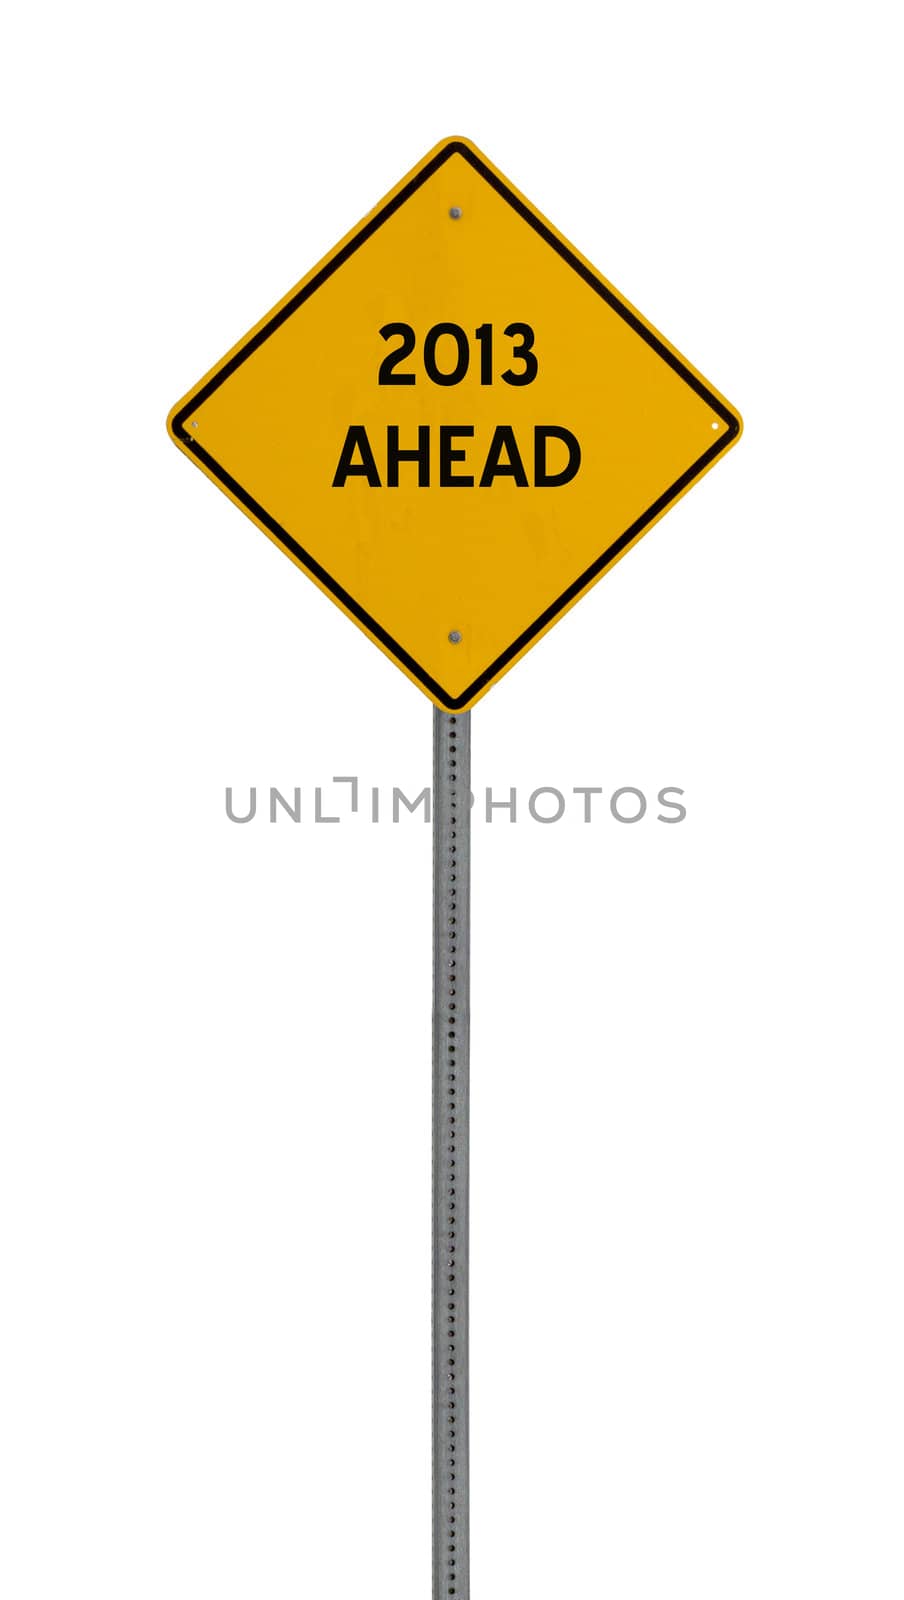 2013 ahead - Yellow road warning sign by jeremywhat